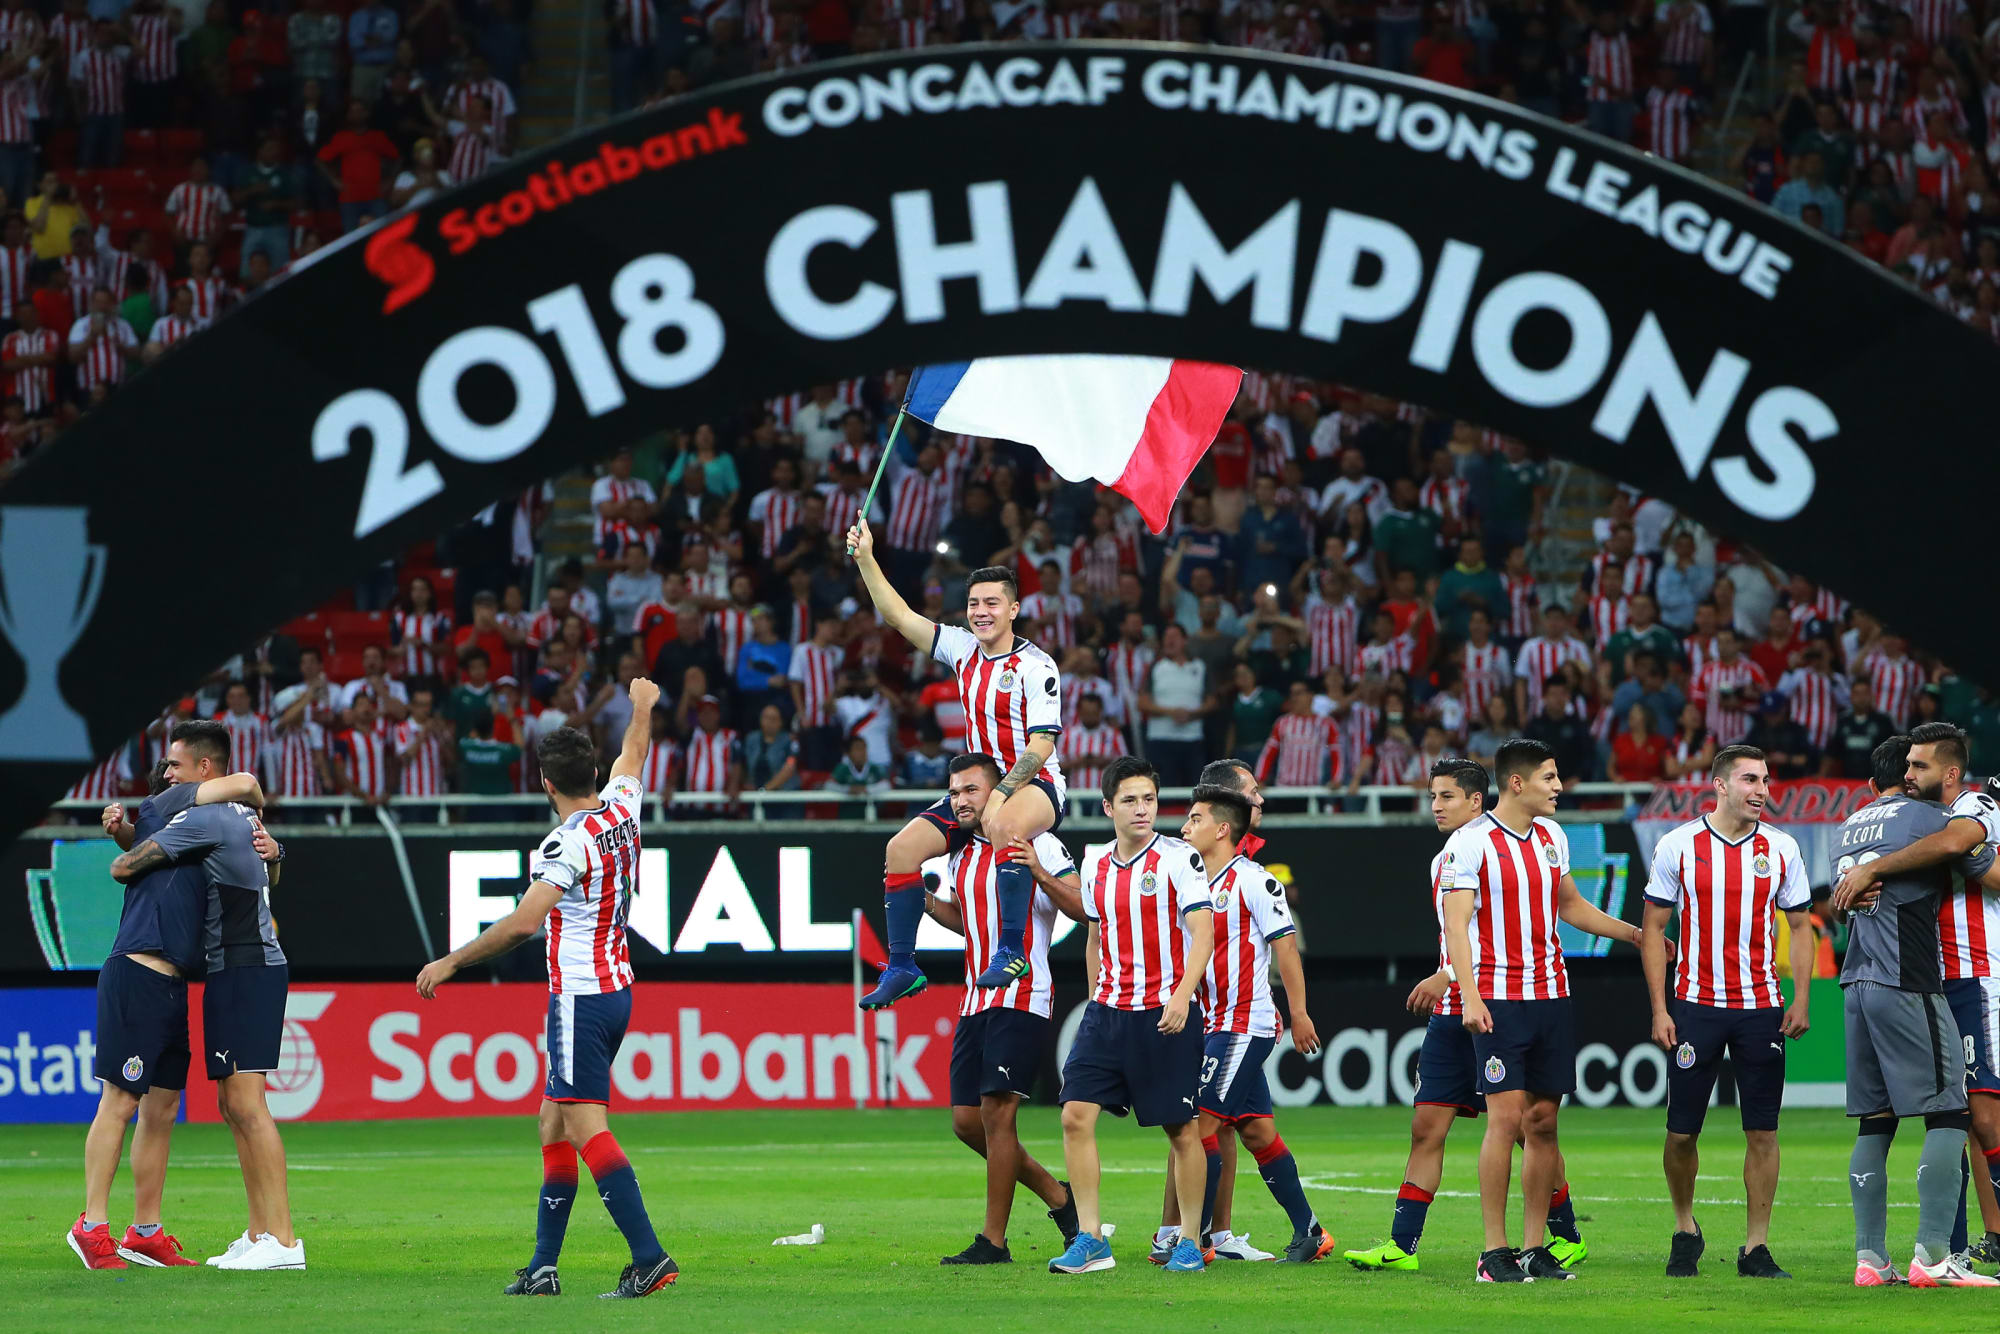 Concacaf - CONCACAF Gold Cup Final Betting Preview 2019 - Odds and ... - Concacaf champions league to include var in 2021 and will expand in 2023.